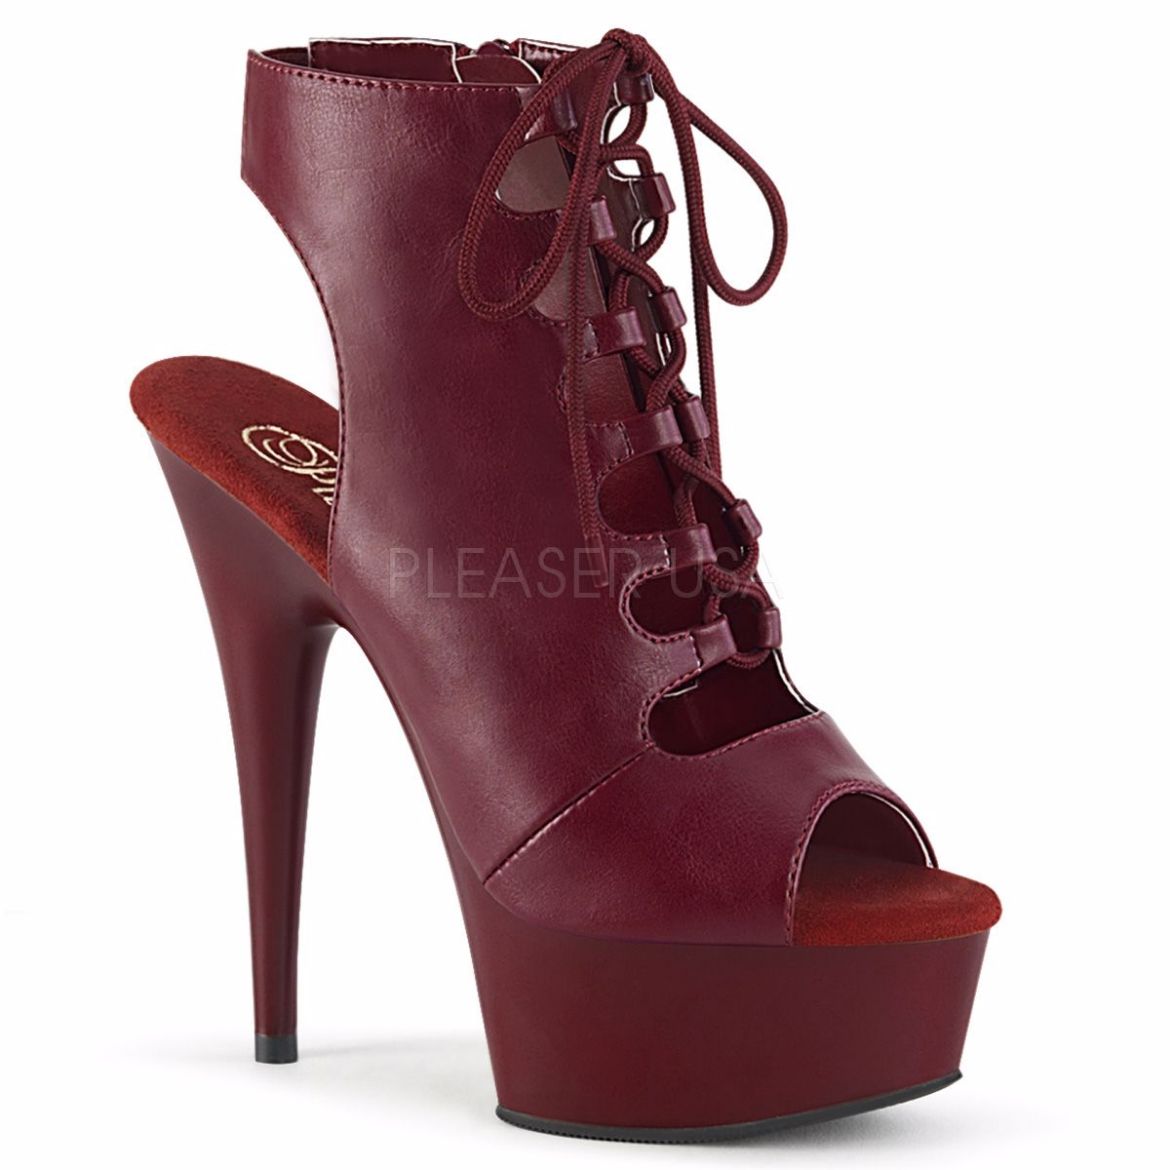 Product image of Pleaser DELIGHT-600-20 Burgundy Faux Leather/Burgundy Matte 6 inch (15.2 cm) Heel 1 3/4 inch (4.5 cm) Platform Front Lace-Up Ankle Bootie Side Zip